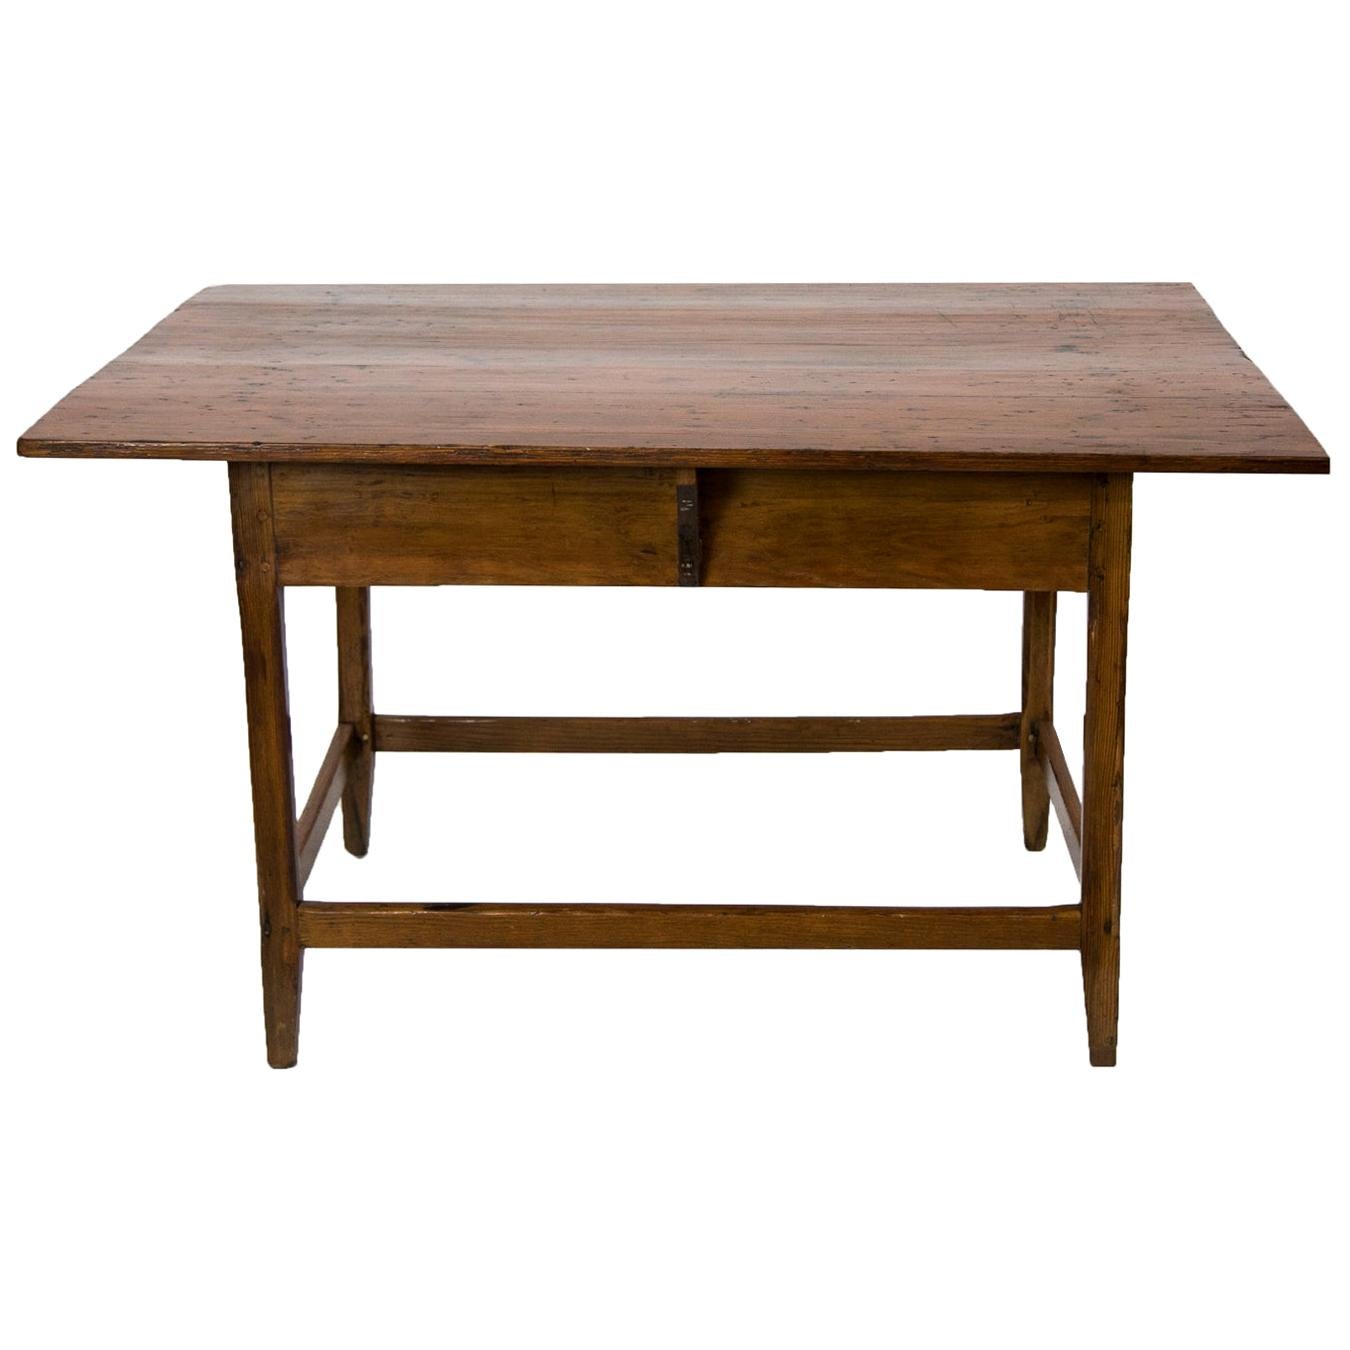  American Pine Stretcher Base Table For Sale